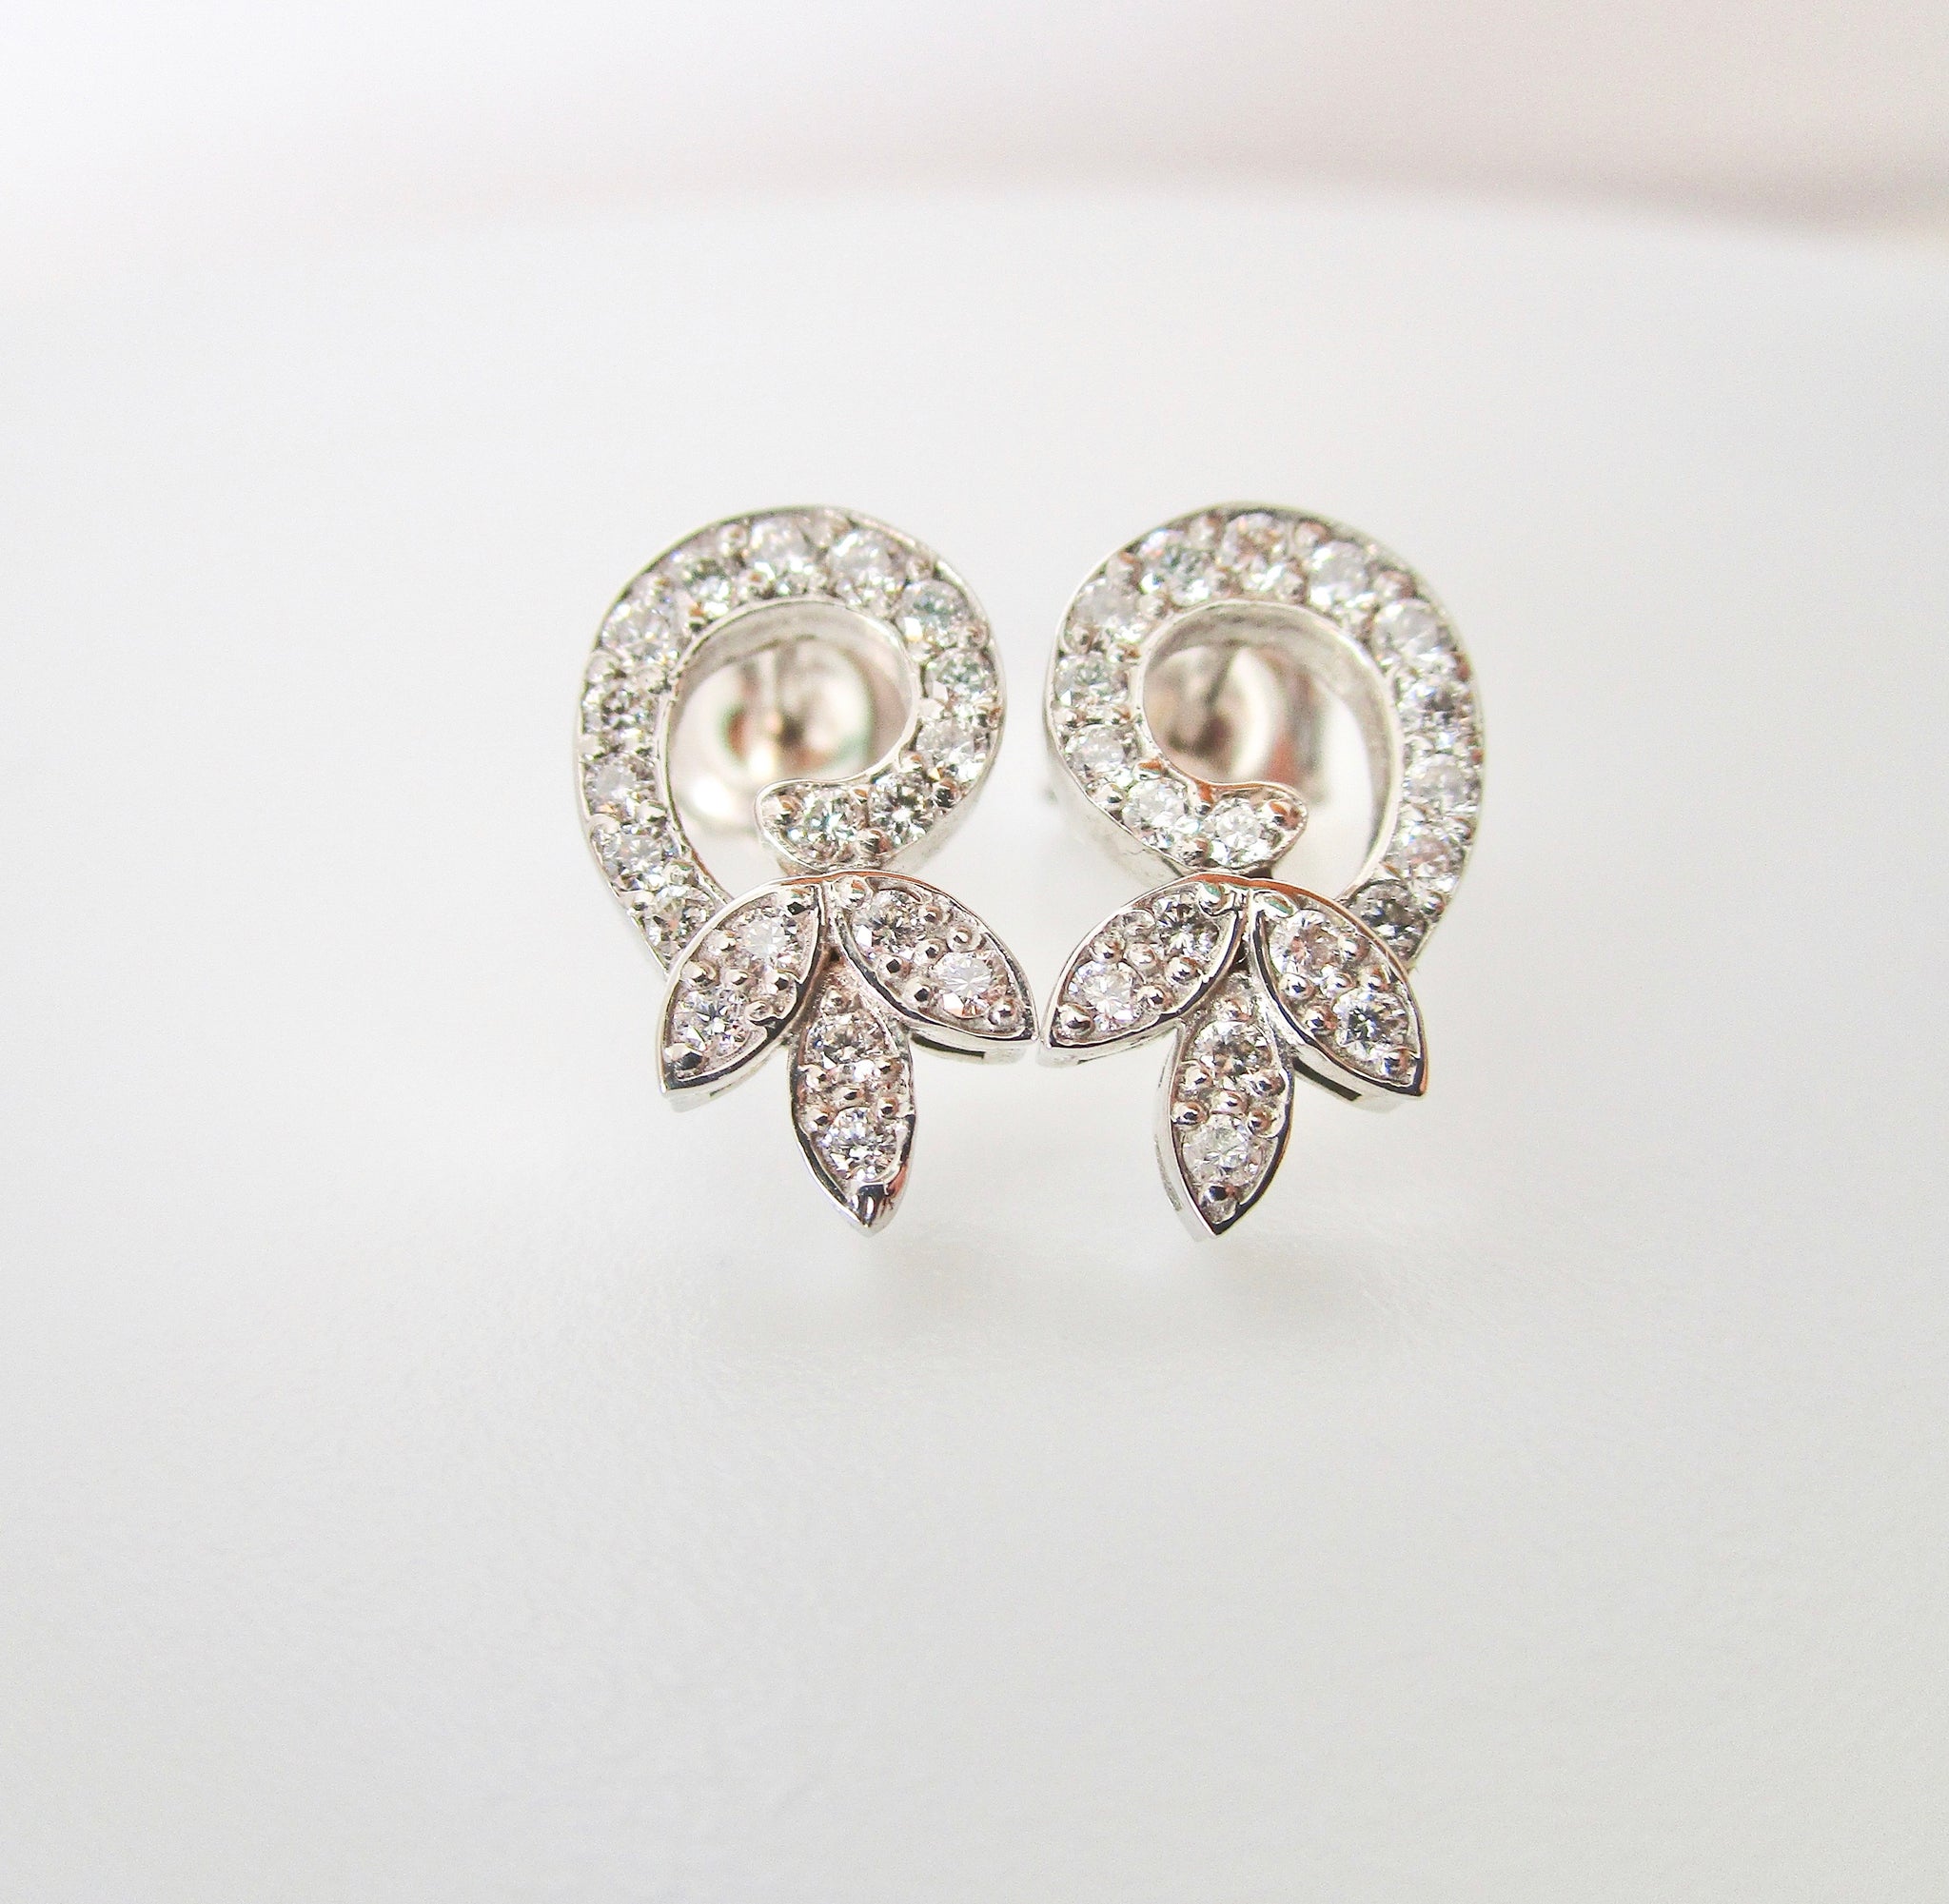 Half  Hearts White Gold and Diamonds Earrings